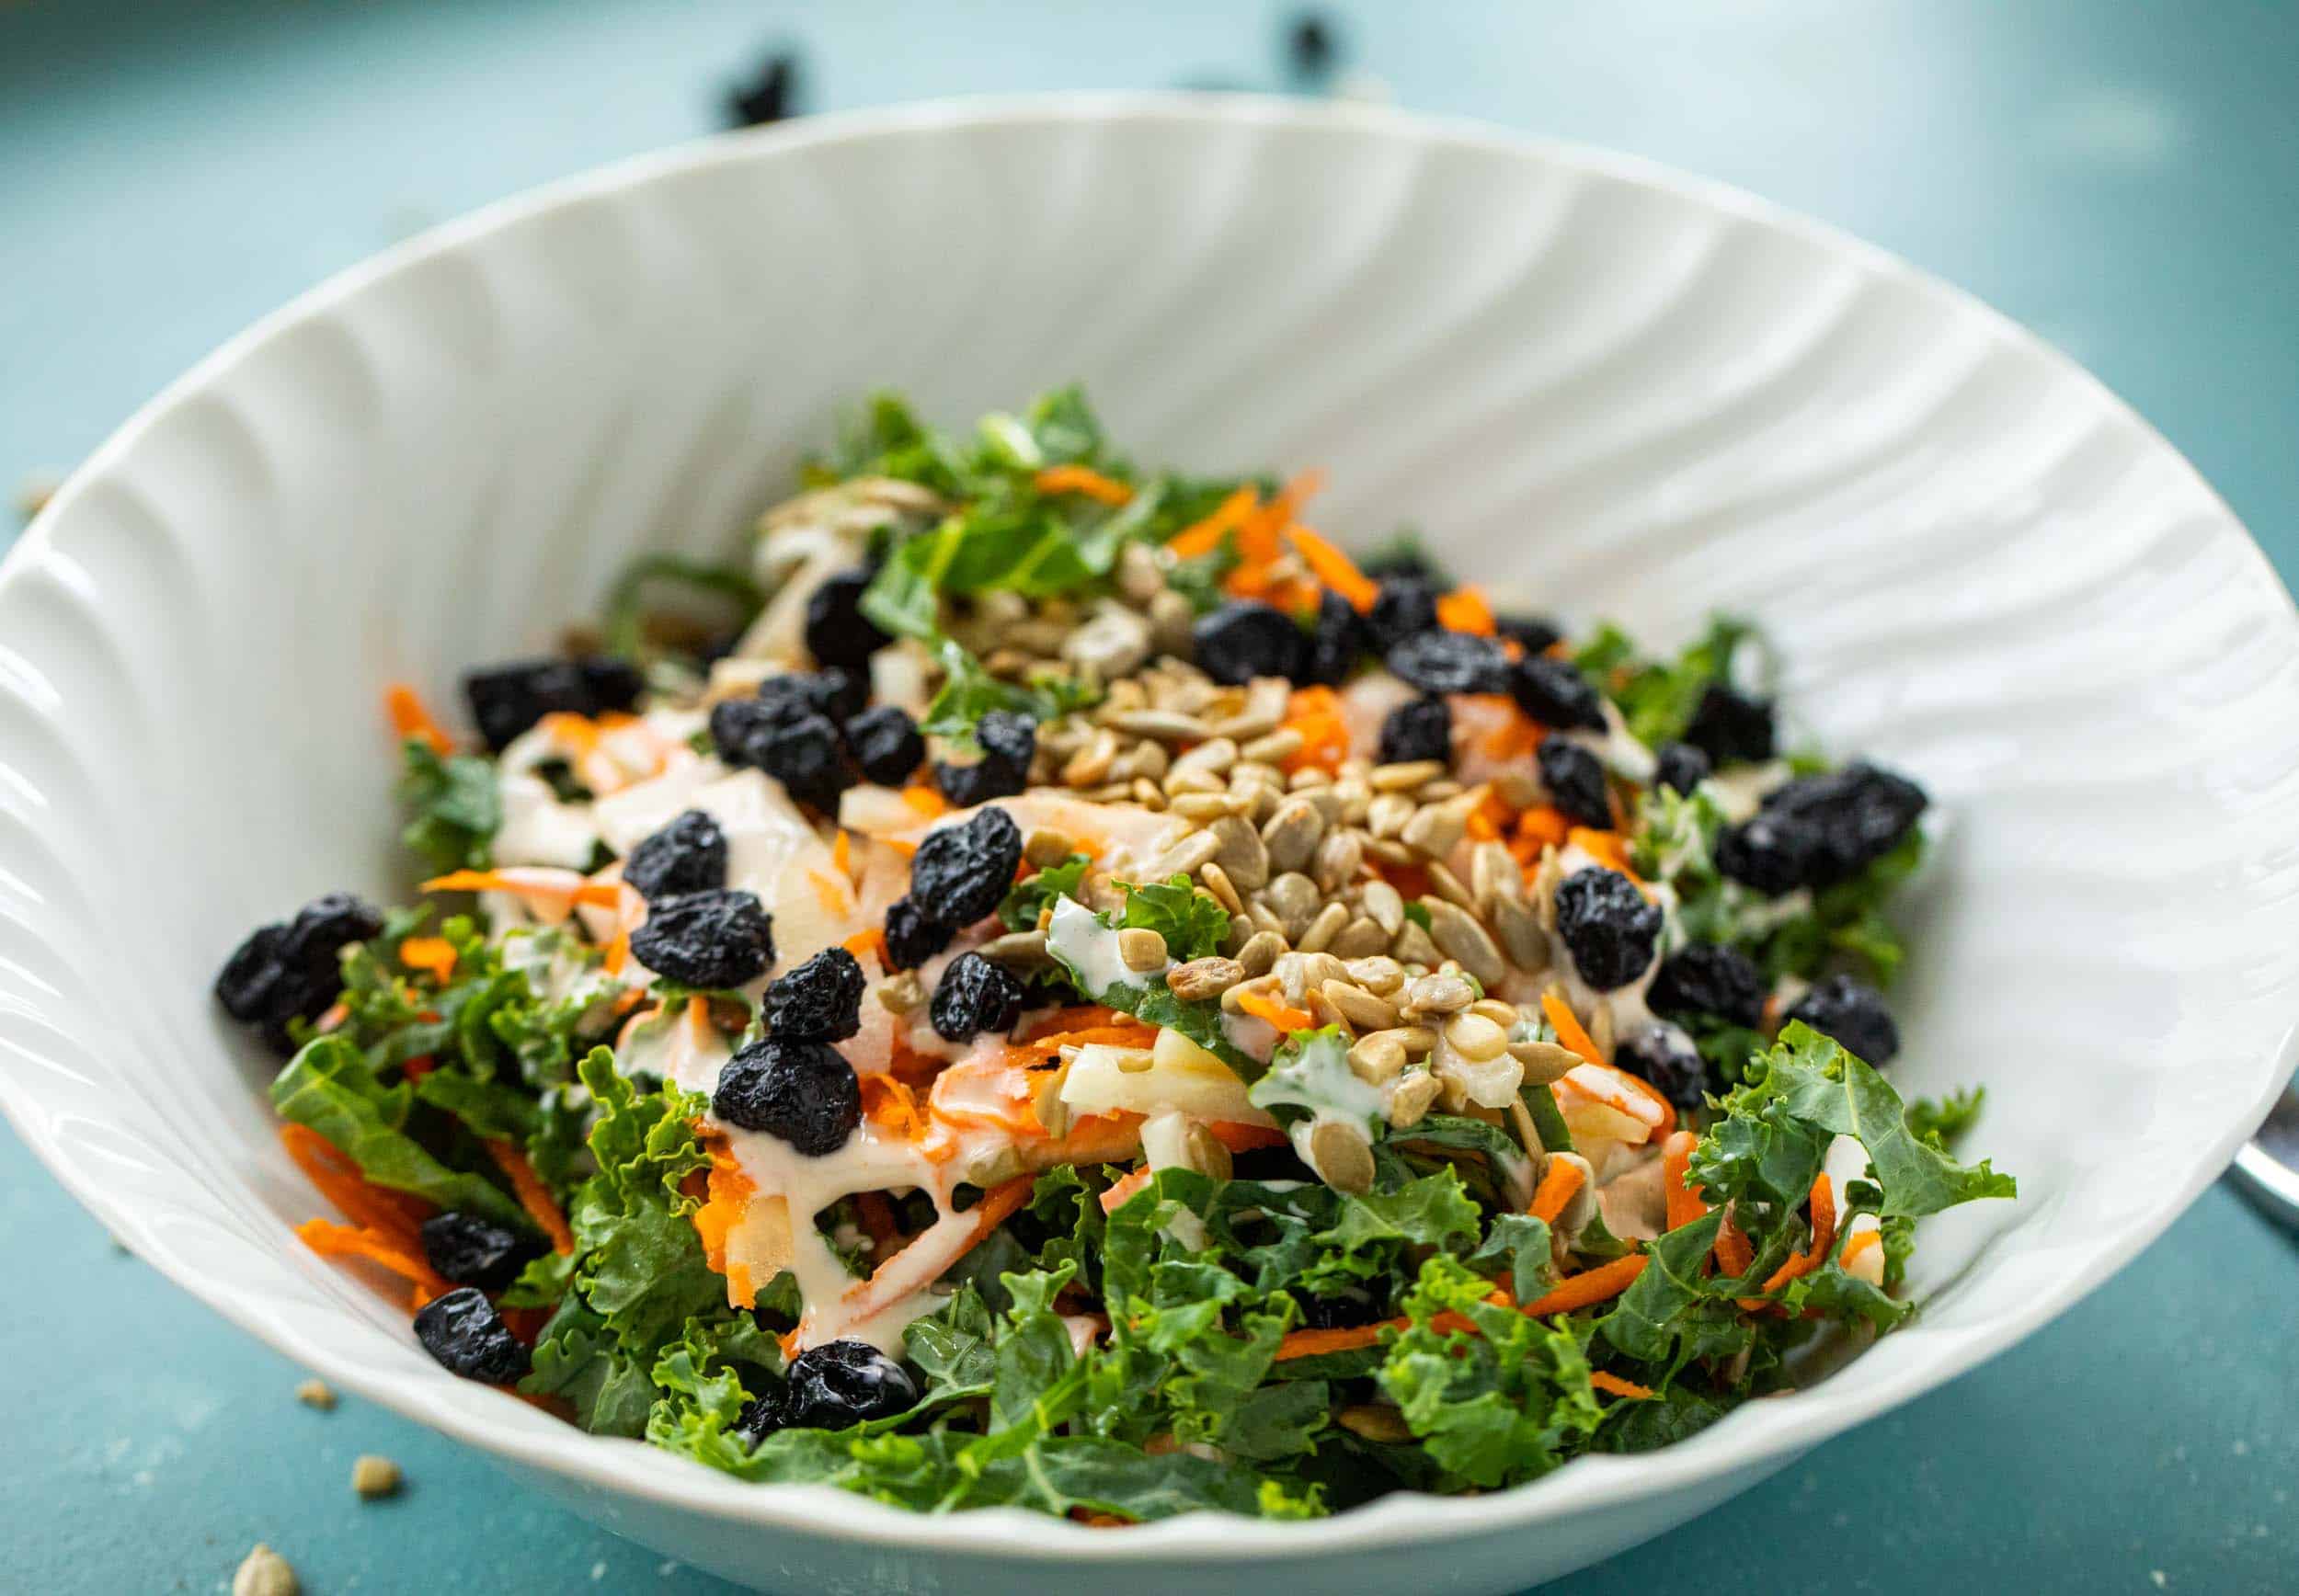 Creamy Kale Slaw with Blueberries and Seeds Image